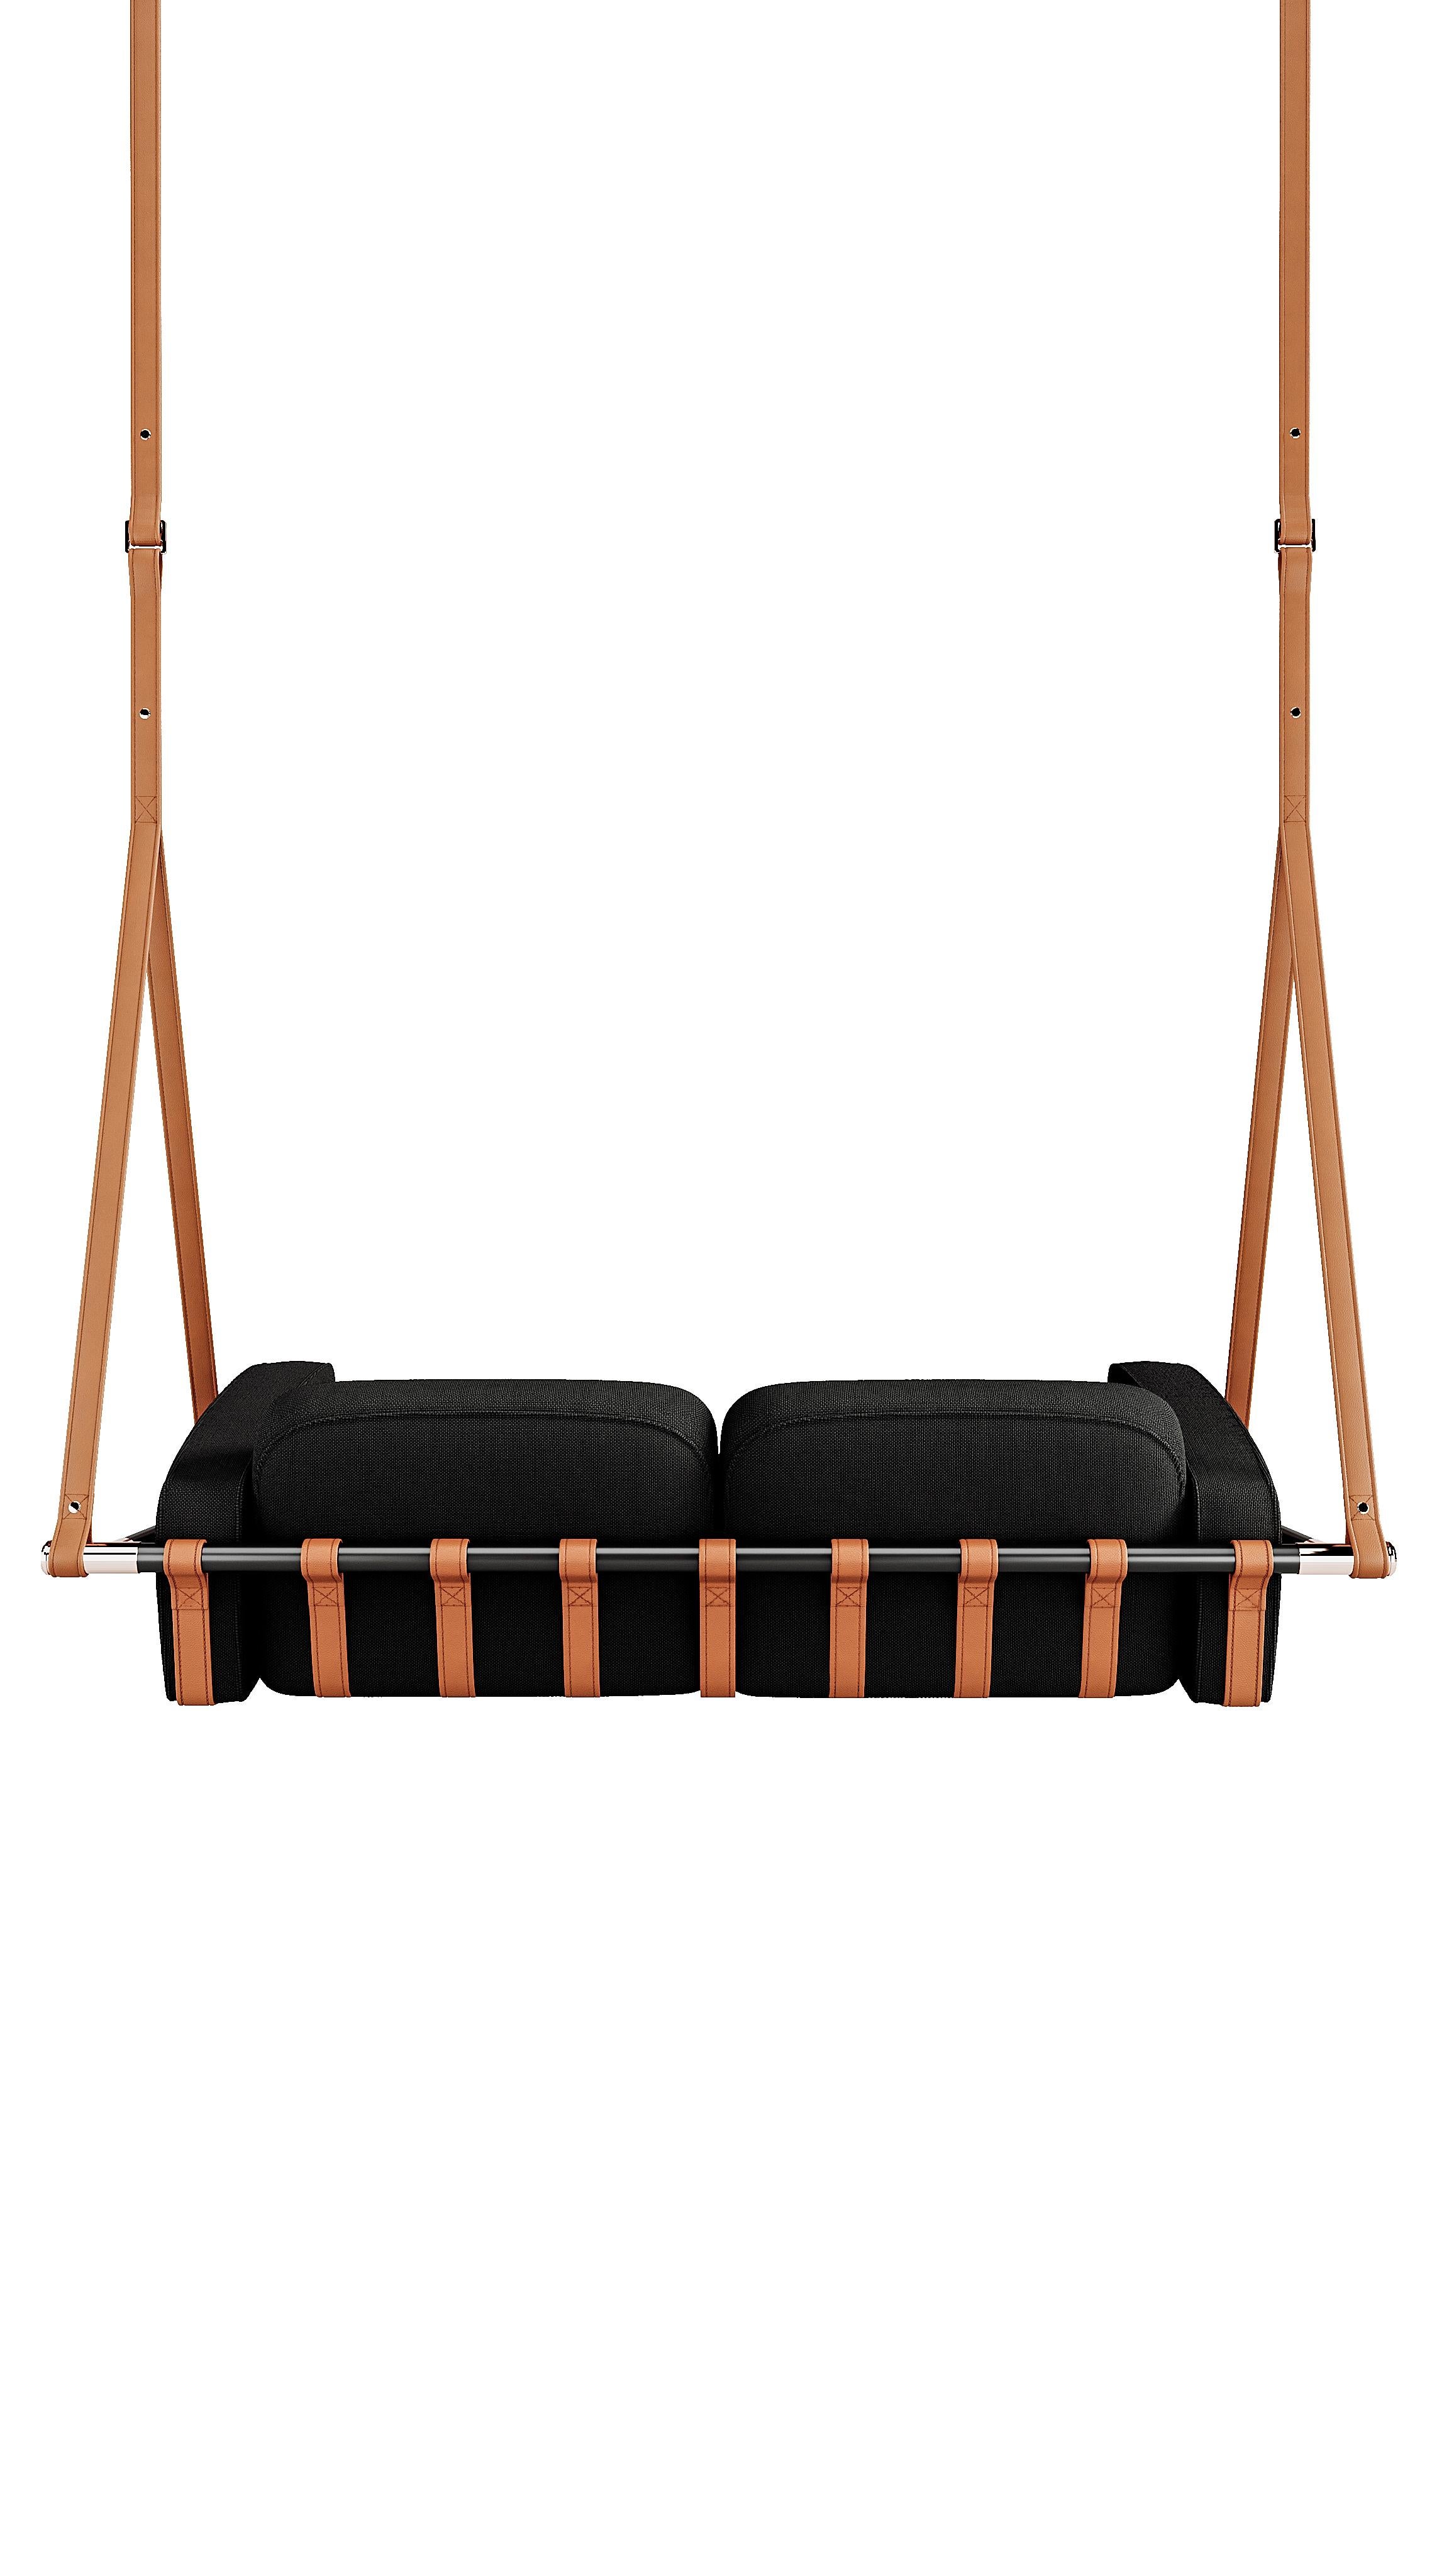 Fable - Hanging sofa by Myface

21st-century contemporary outdoor hanging sofa made with suspension: Outdoor leather straps, Metallic, Structure: Black lacquered  stainless steel, Upholstery: Acrylic fabric, Metallic Details: Gold plated 

Hold by